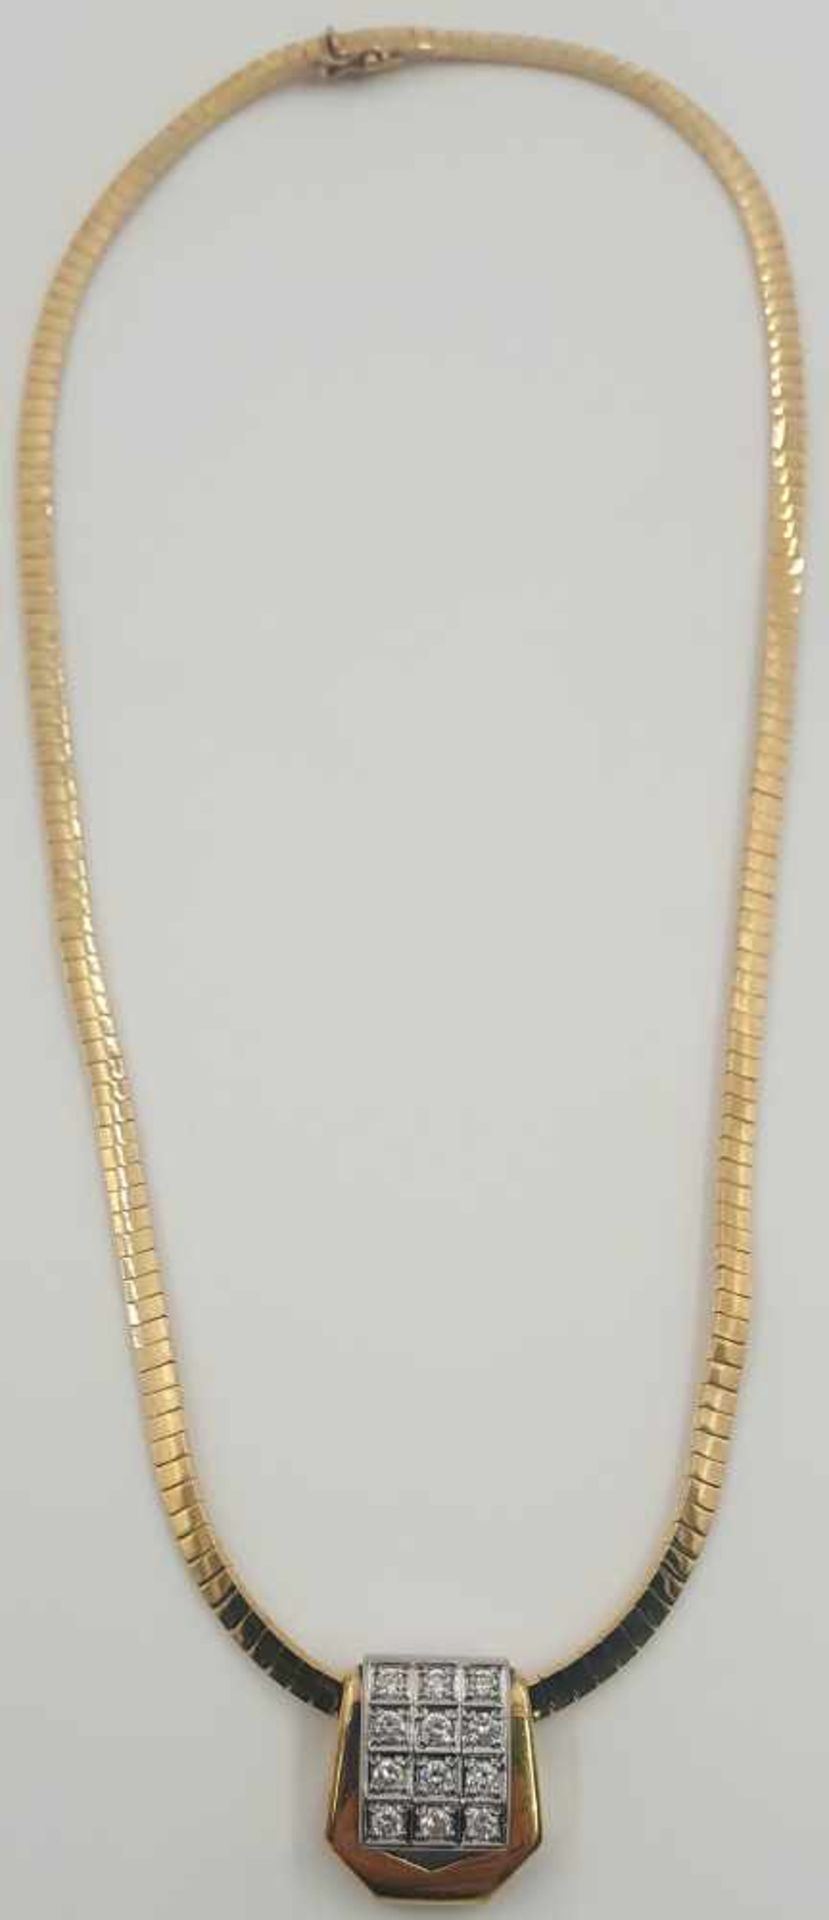 Necklace, 750 yellow gold and pendant with 12 diamonds.